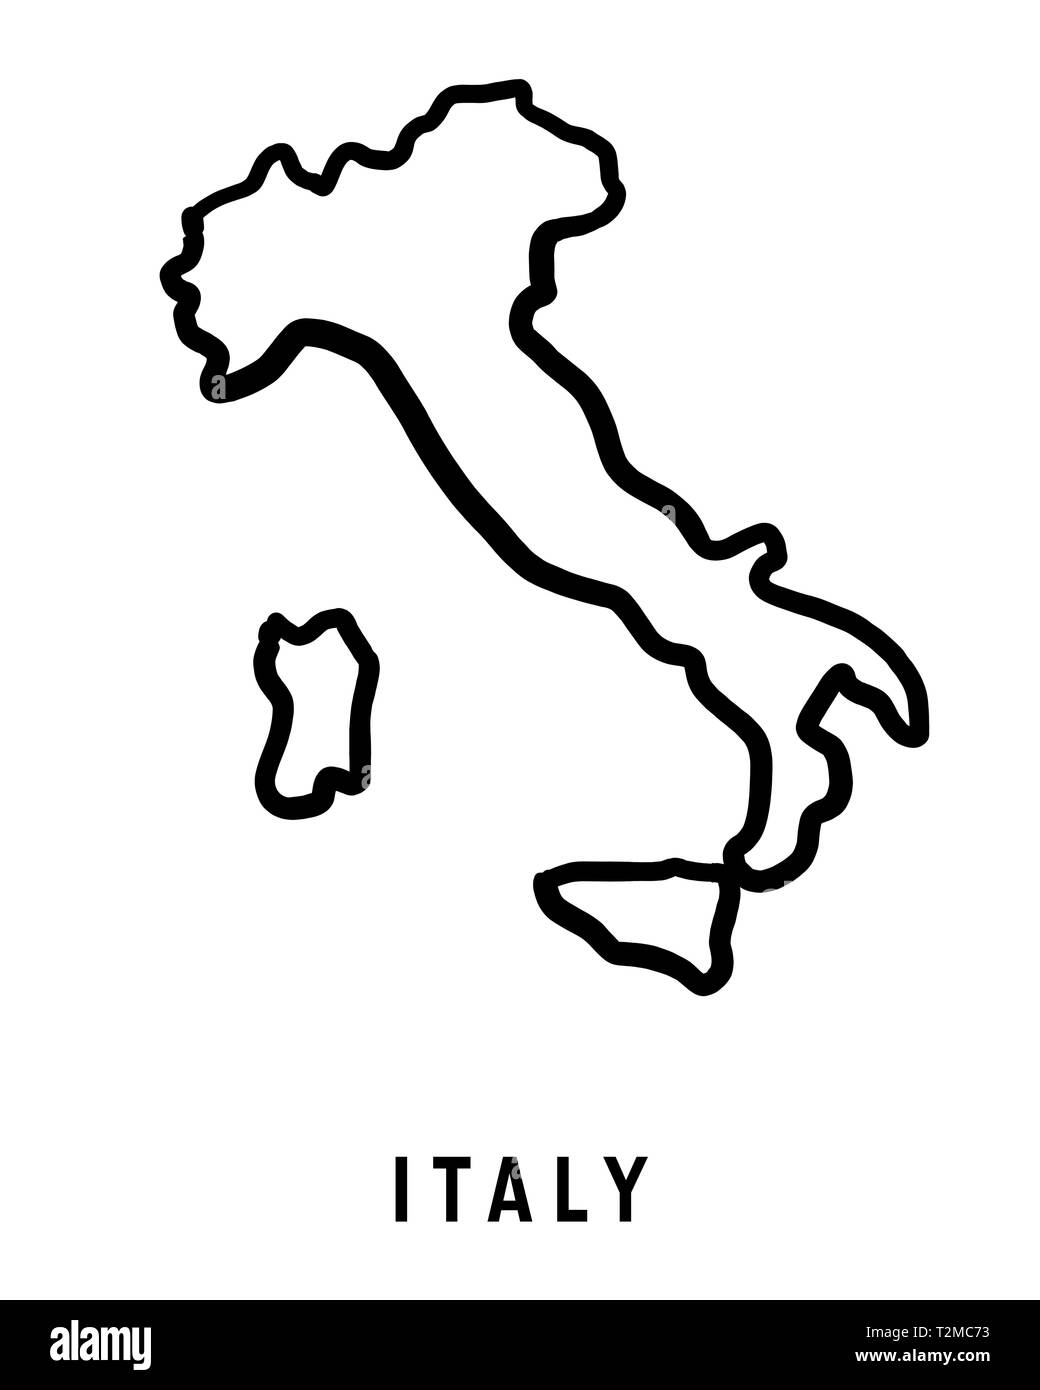 Italy map outline - smooth country shape map vector. Stock Vector